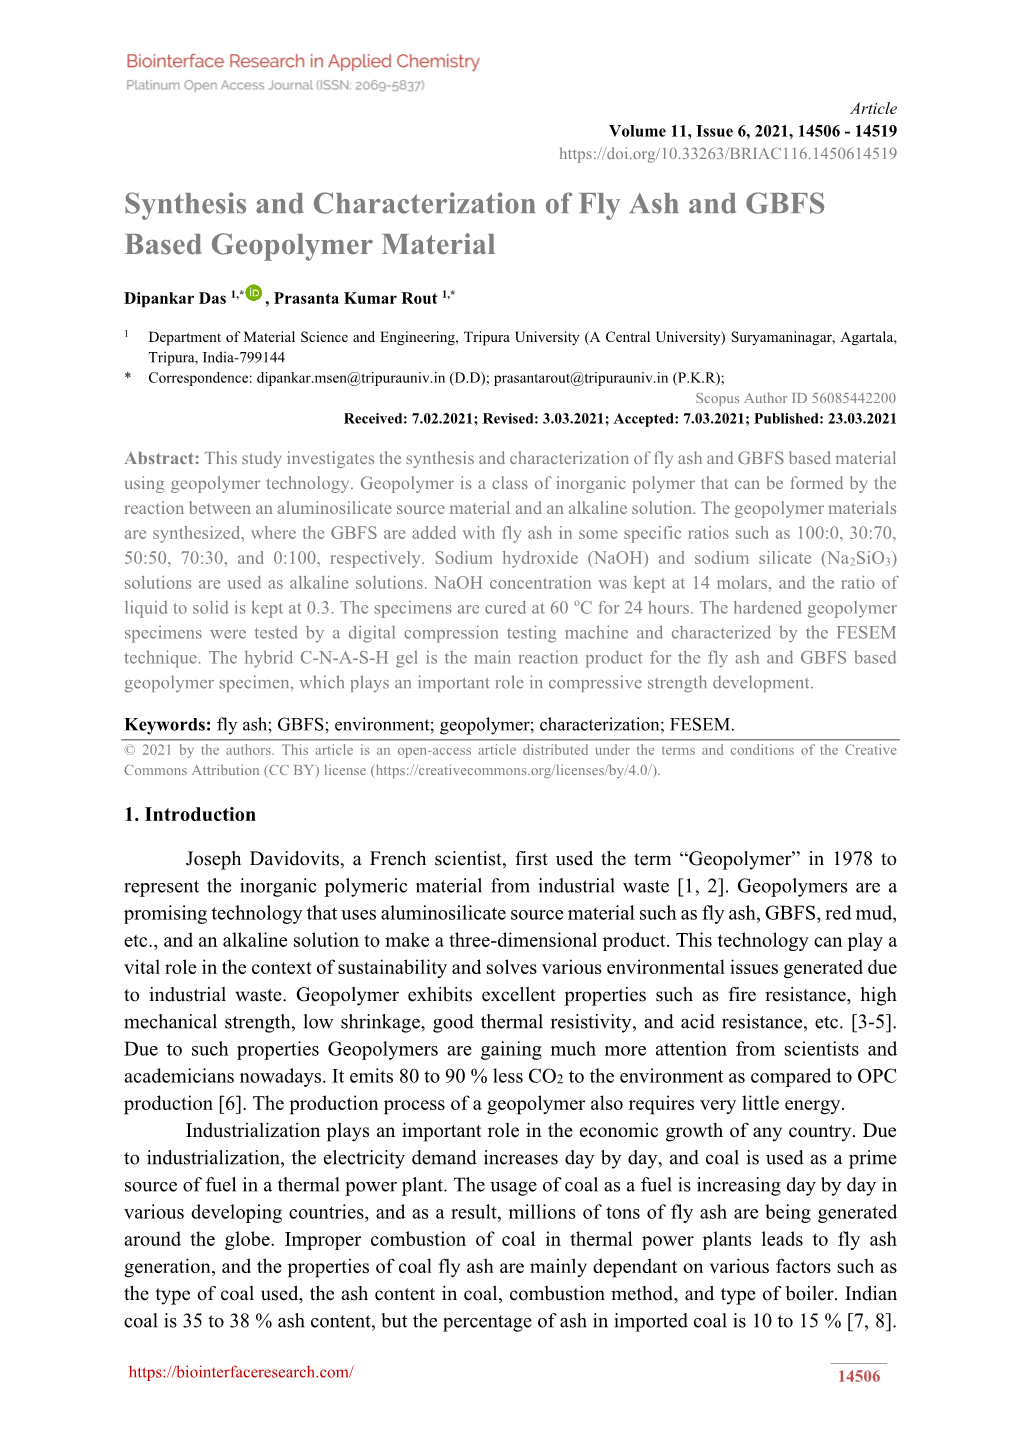 Synthesis and Characterization of Fly Ash and GBFS Based Geopolymer Material